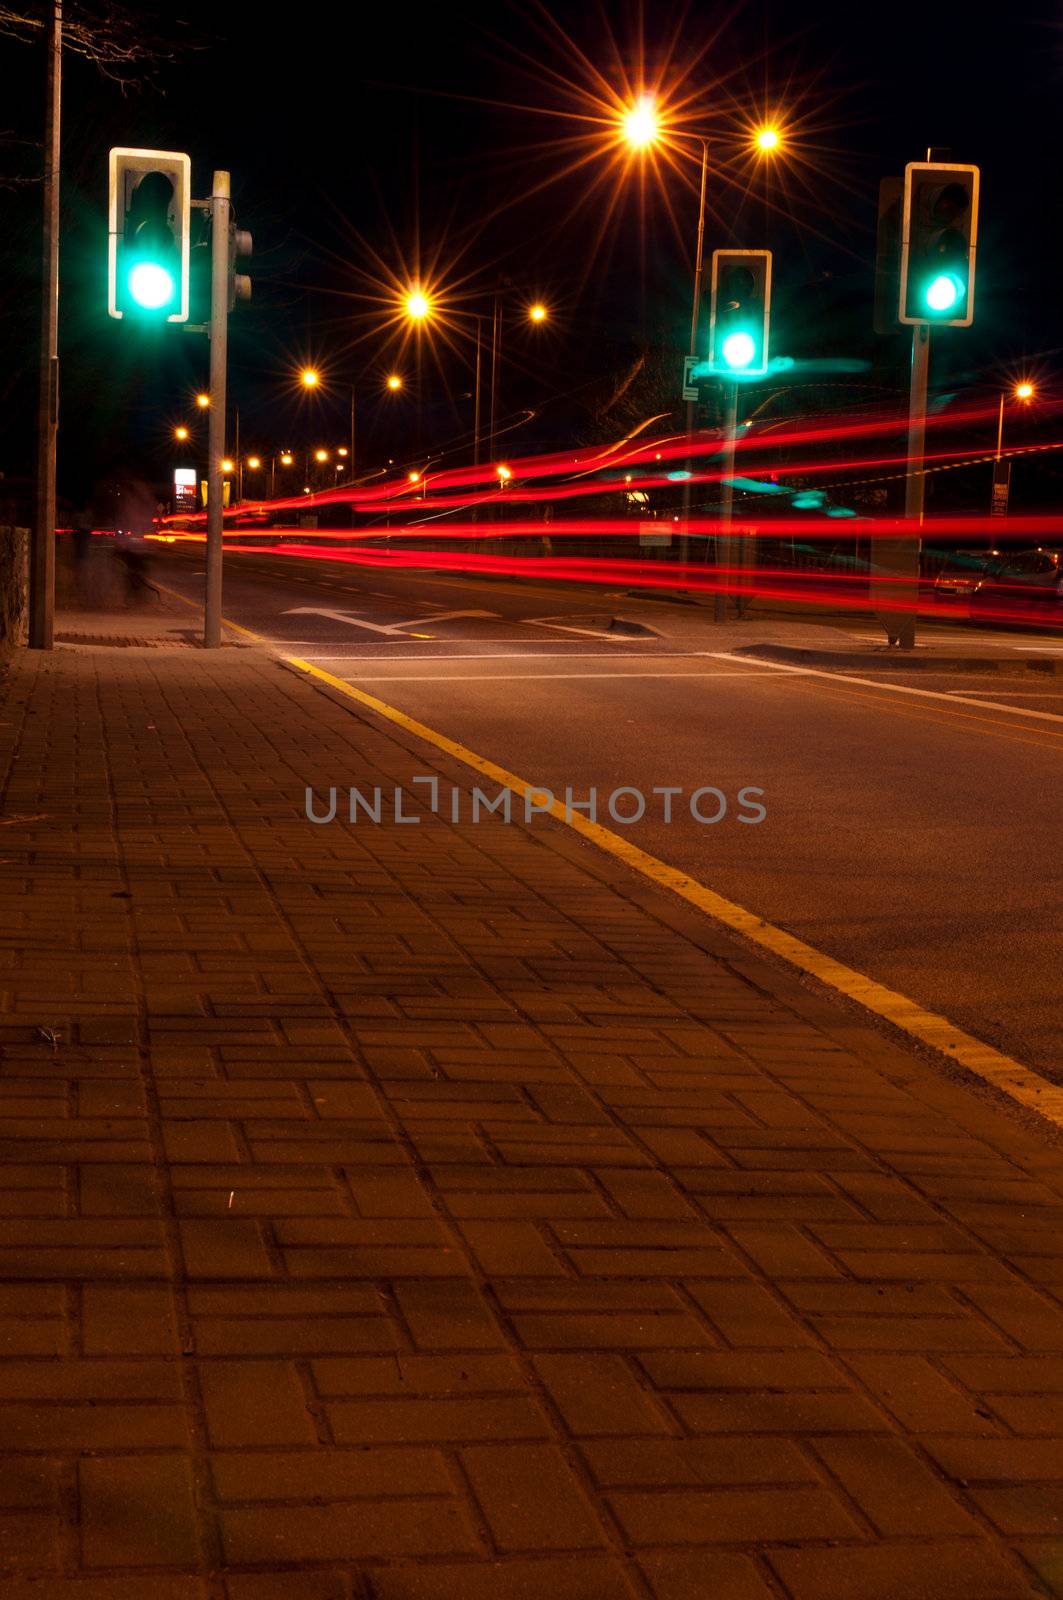 night traffic on a urban road with tail lights (green traffic lights scene, long exposure)